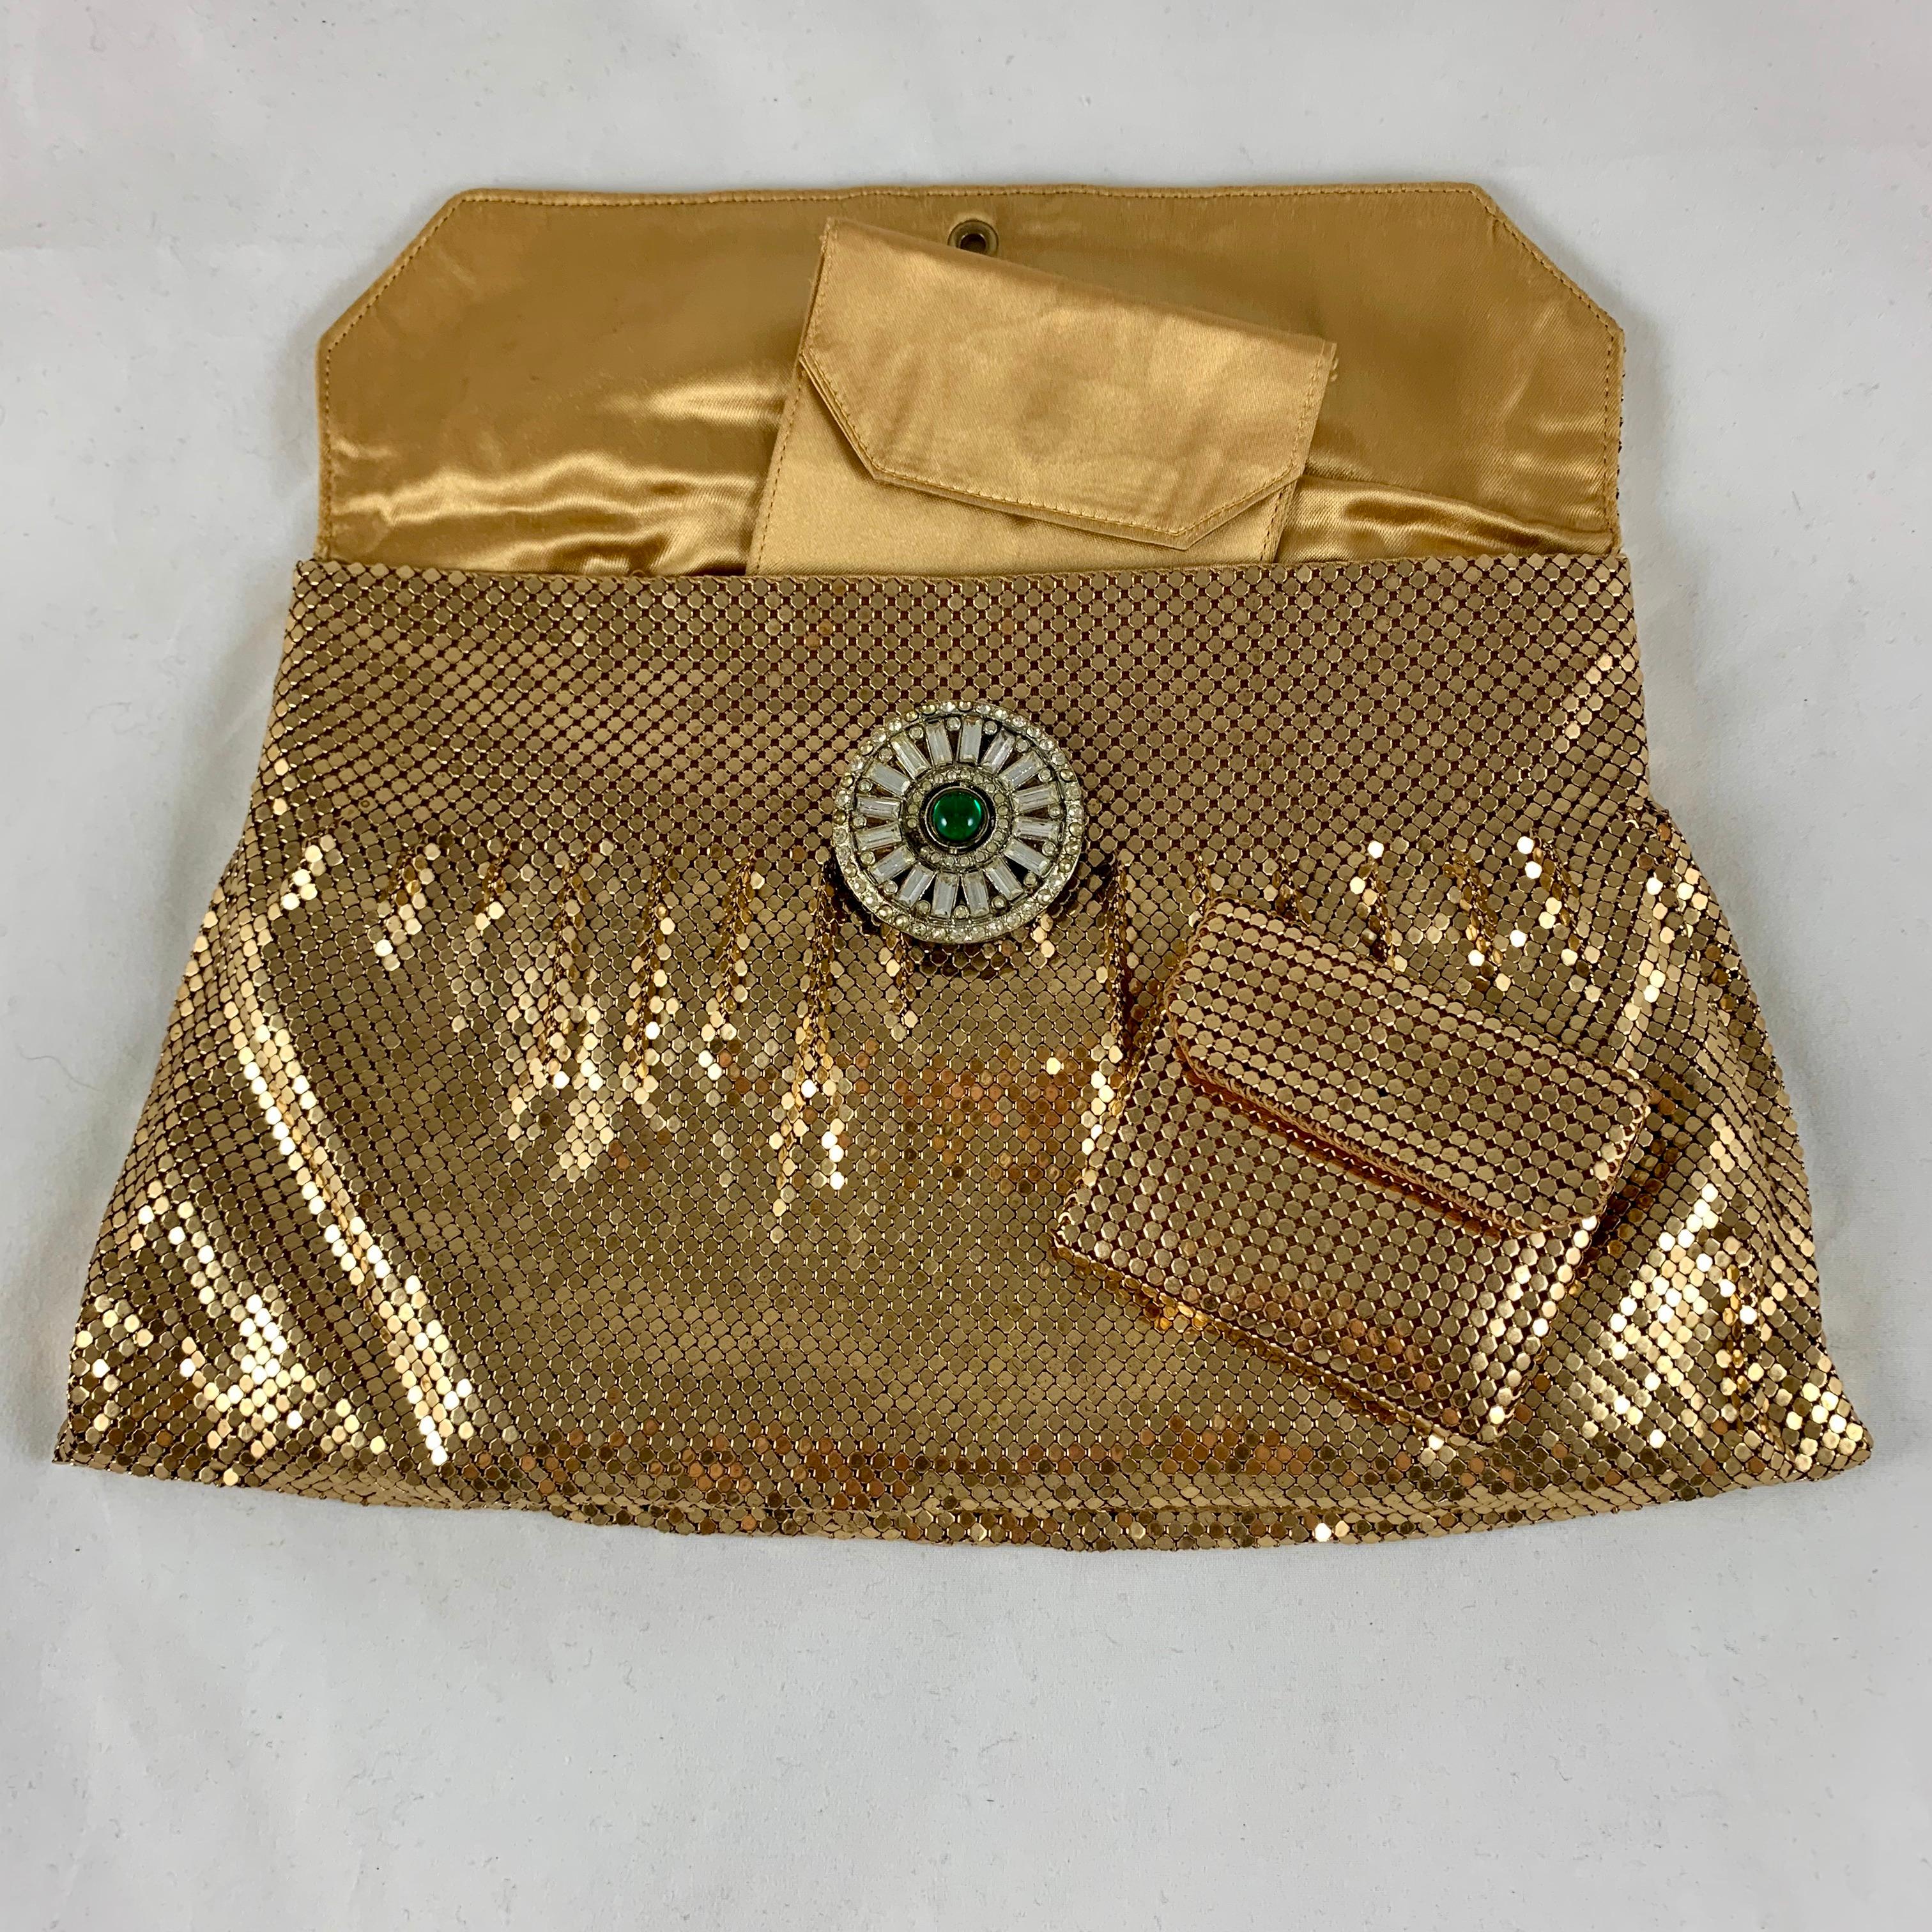 American 1950s Whiting and Davis Gold Mesh Jewel Closure Evening Clutch with Coin Purse For Sale